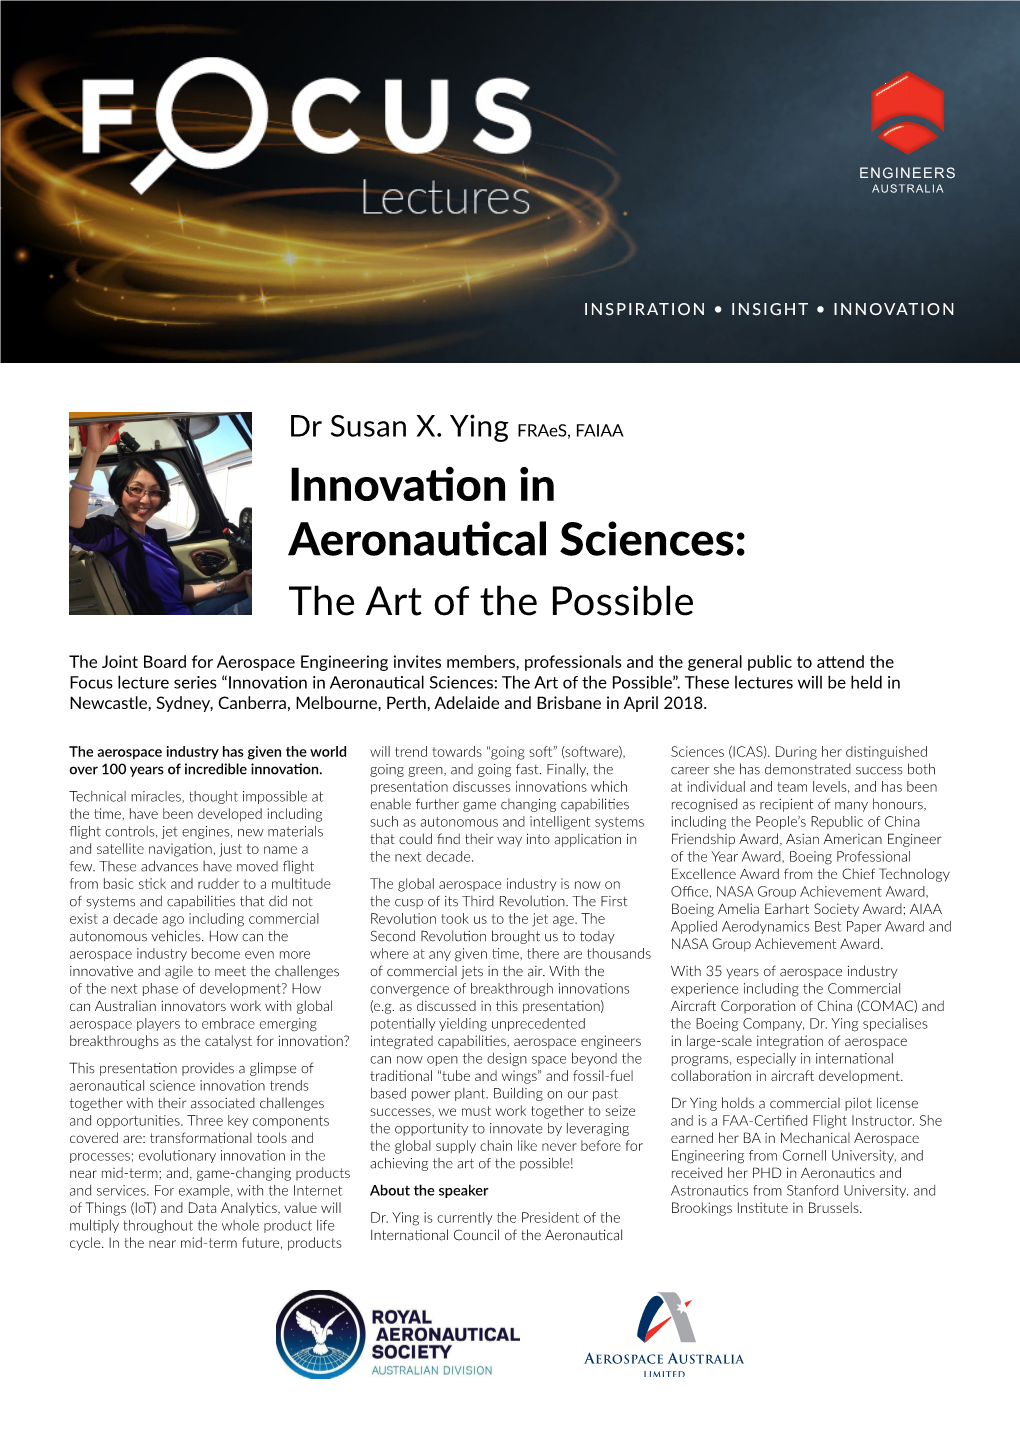 Innovation in Aeronautical Sciences: the Art of the Possible